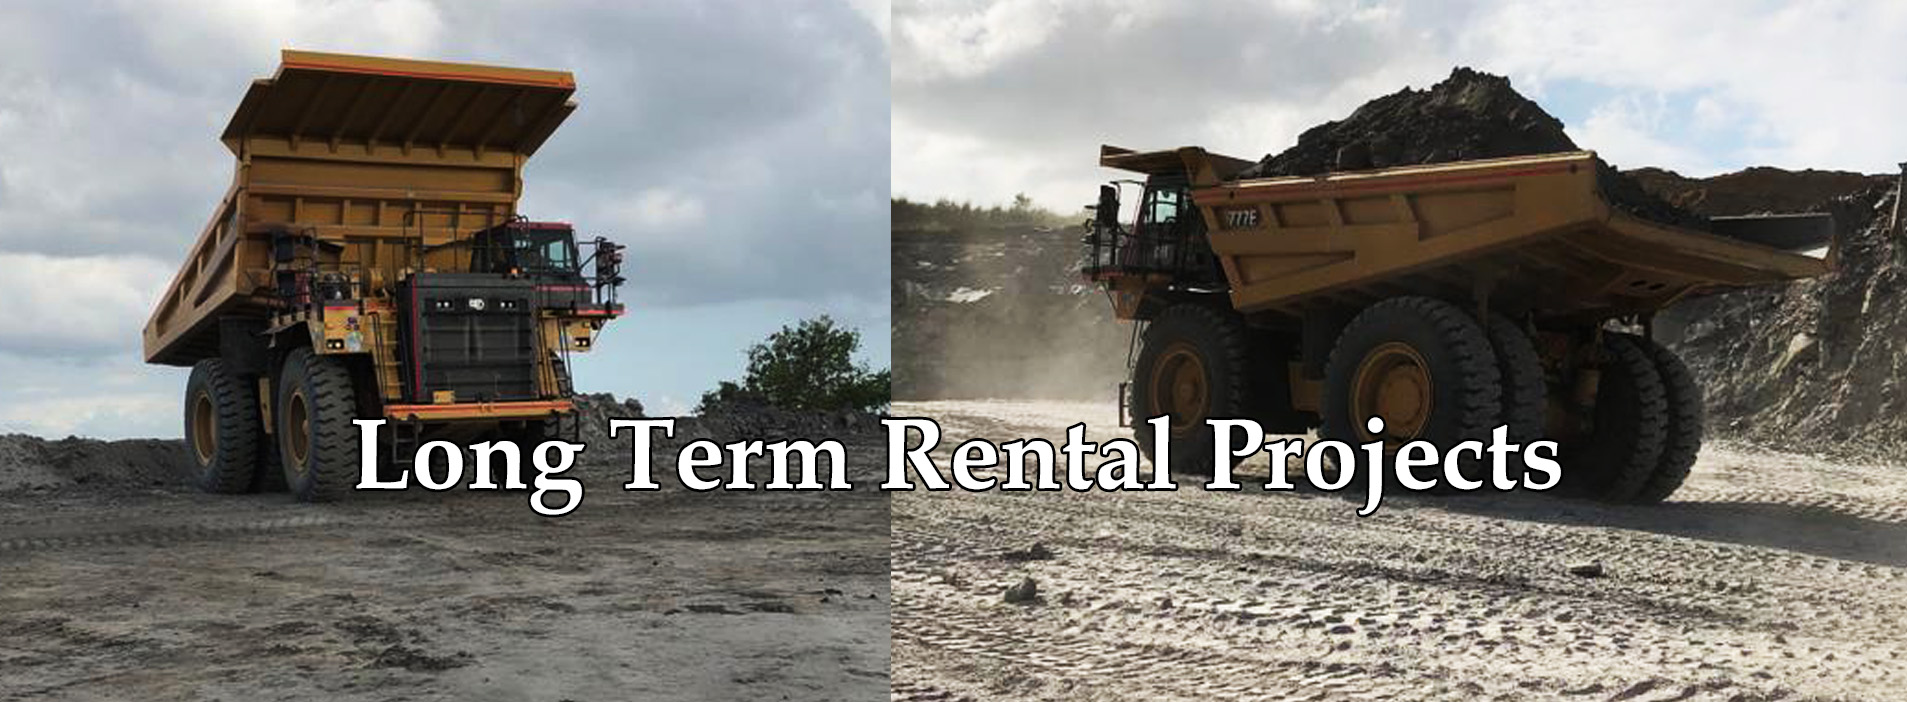 Long Term Rental Projects